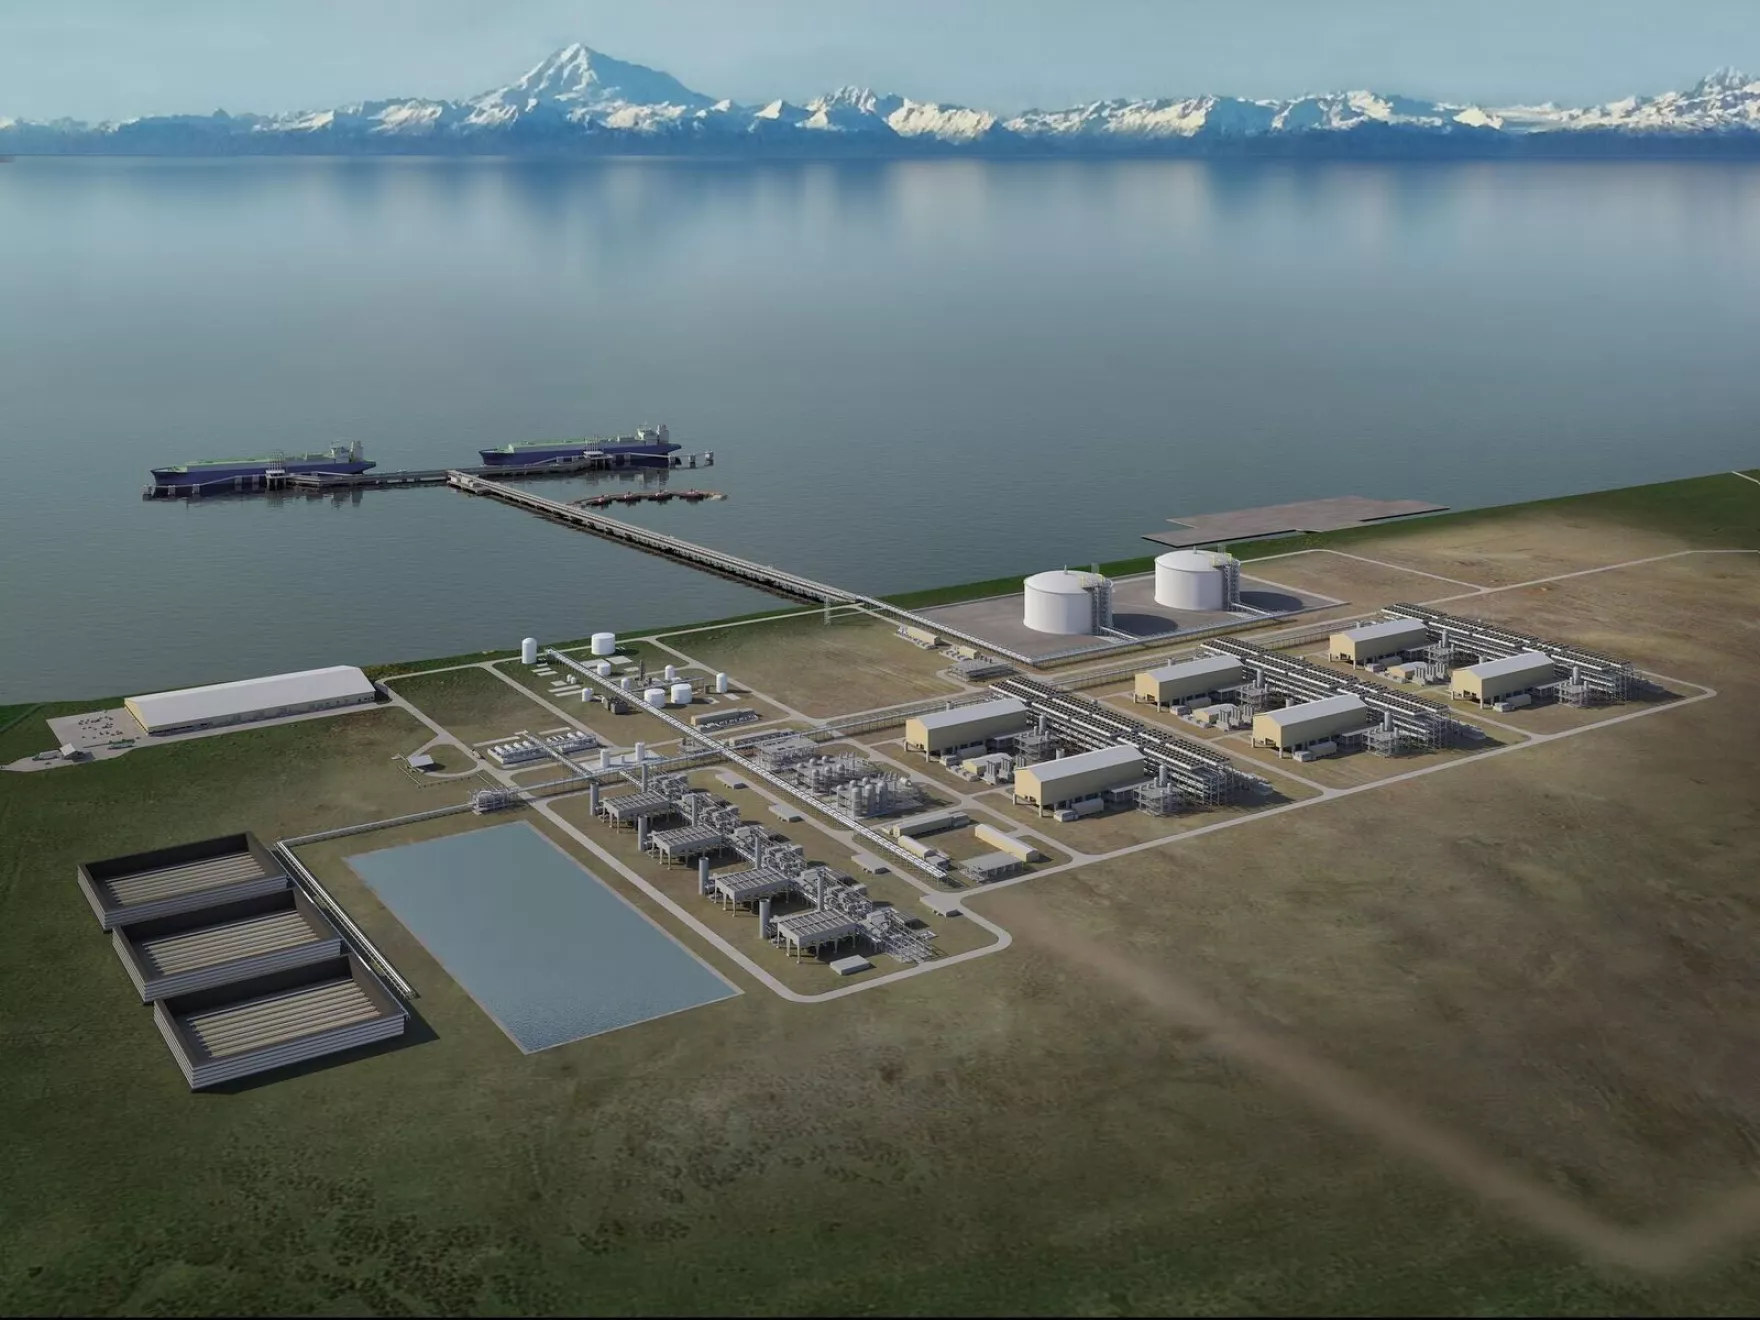 a digital illustration of a coastal gas facility, with snow-capped mountains in the background